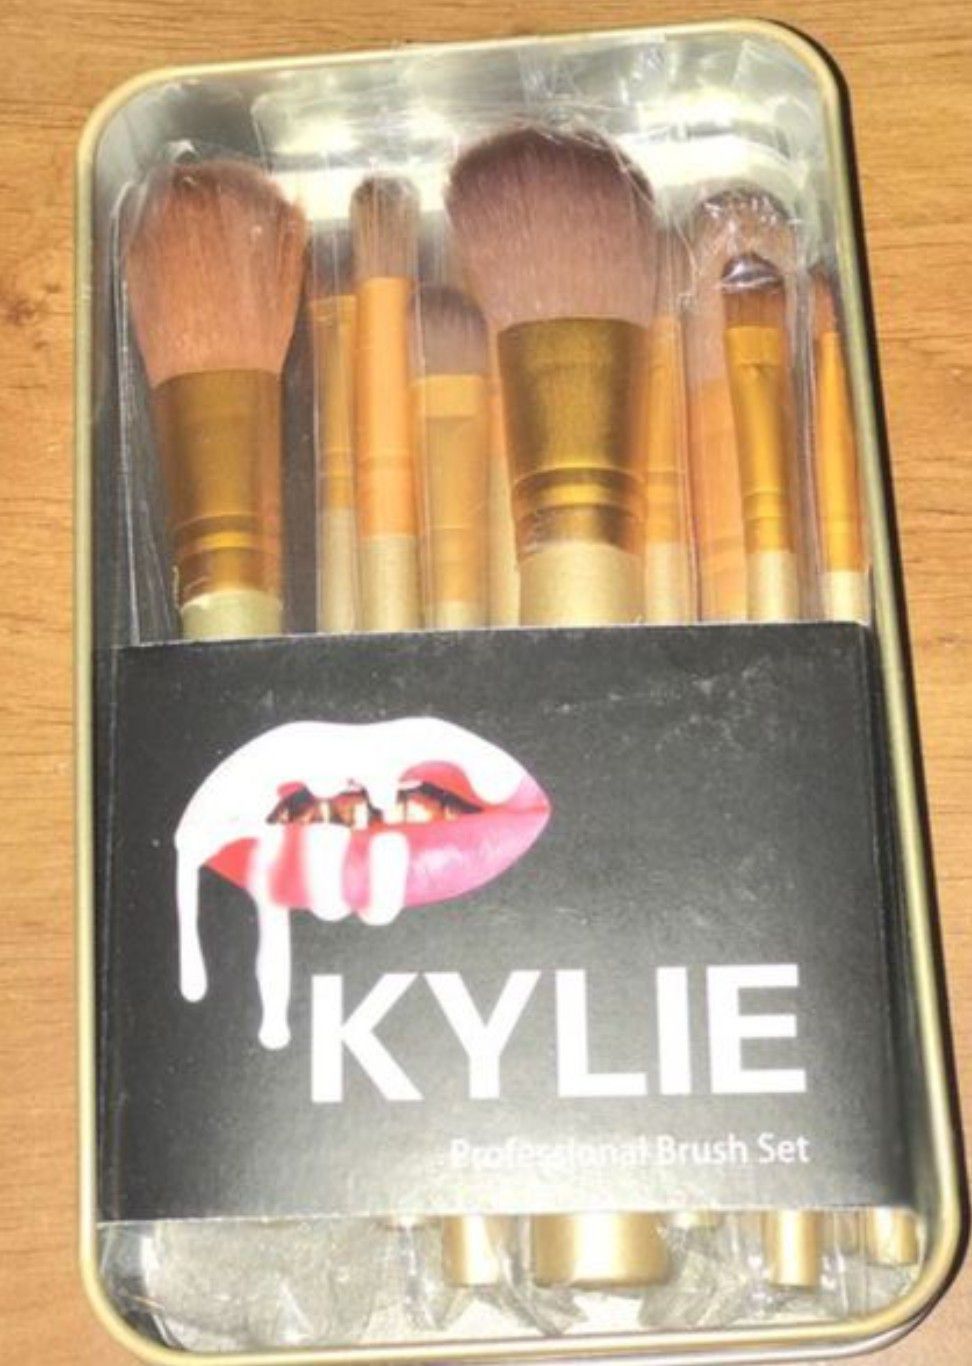 Kylie makeup brush set 12 Brushes total and a matching case